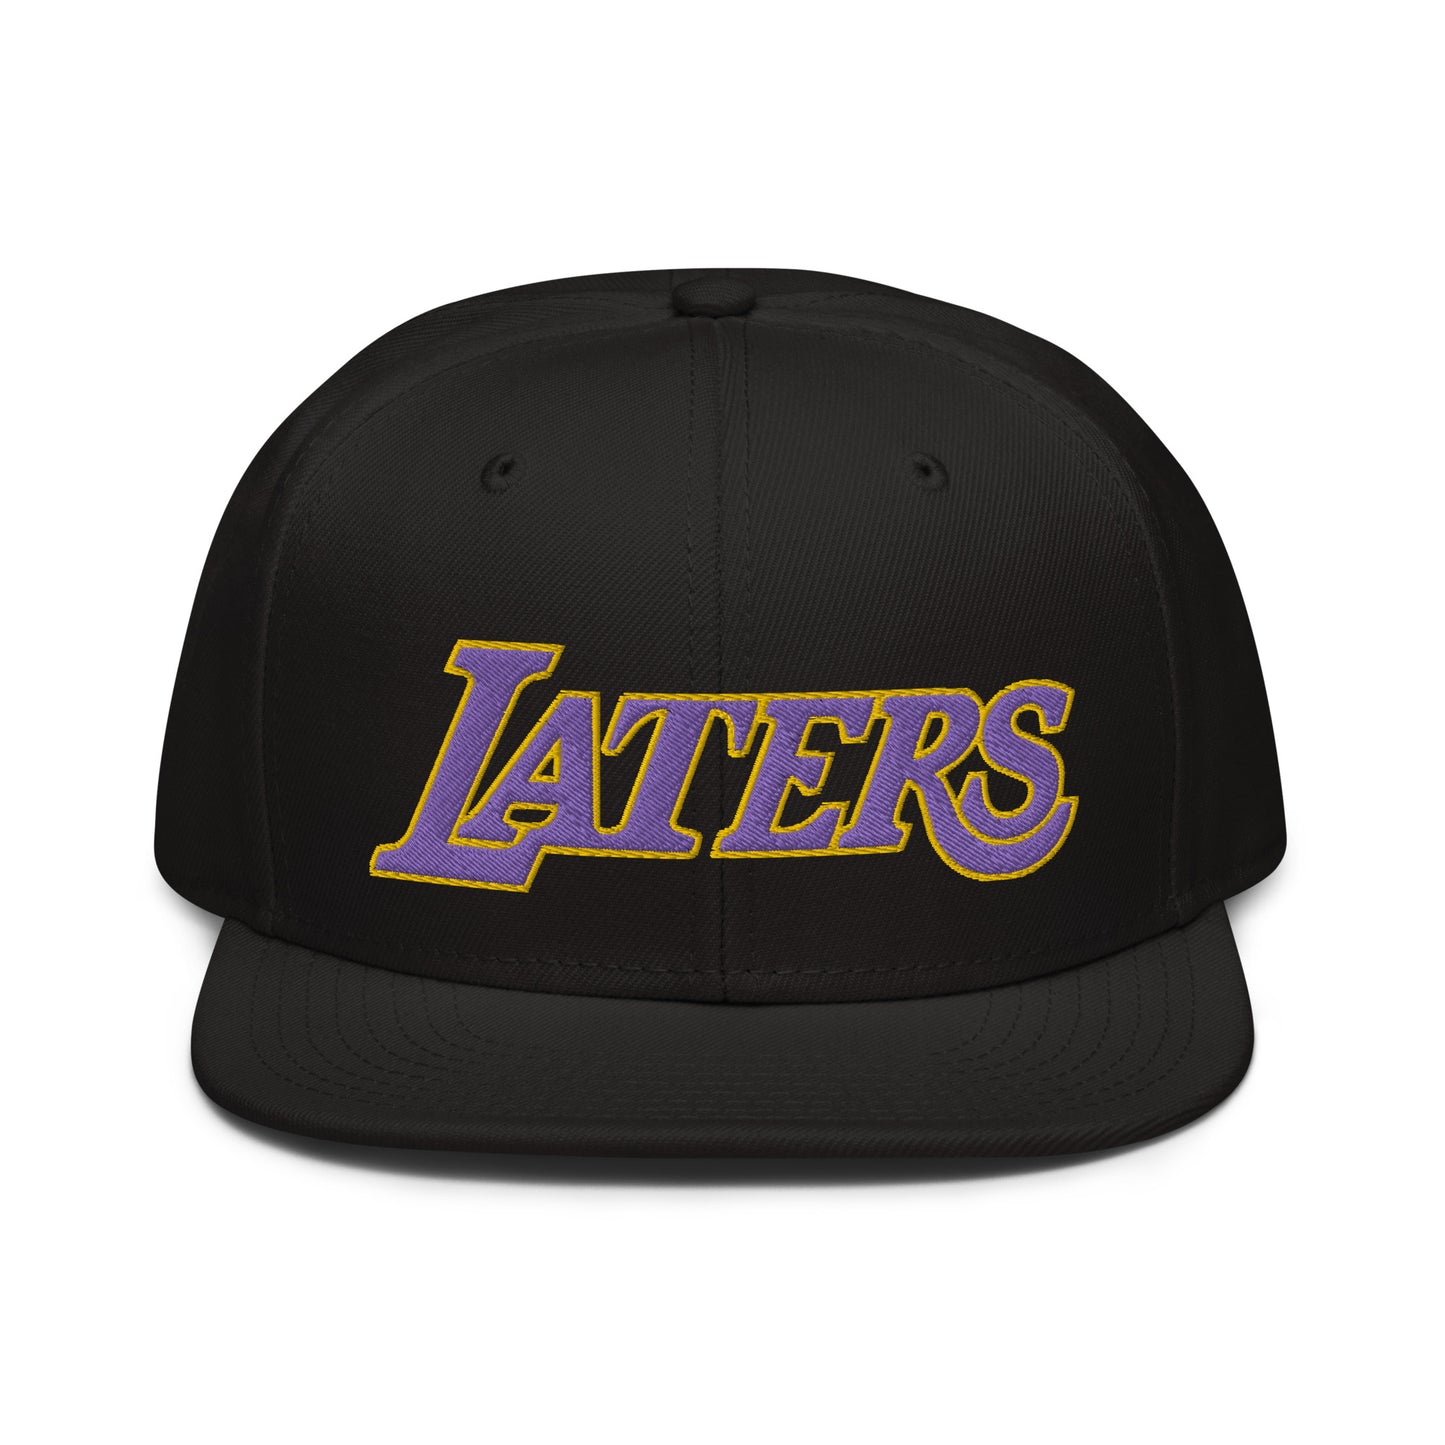 LATERS snapback hat